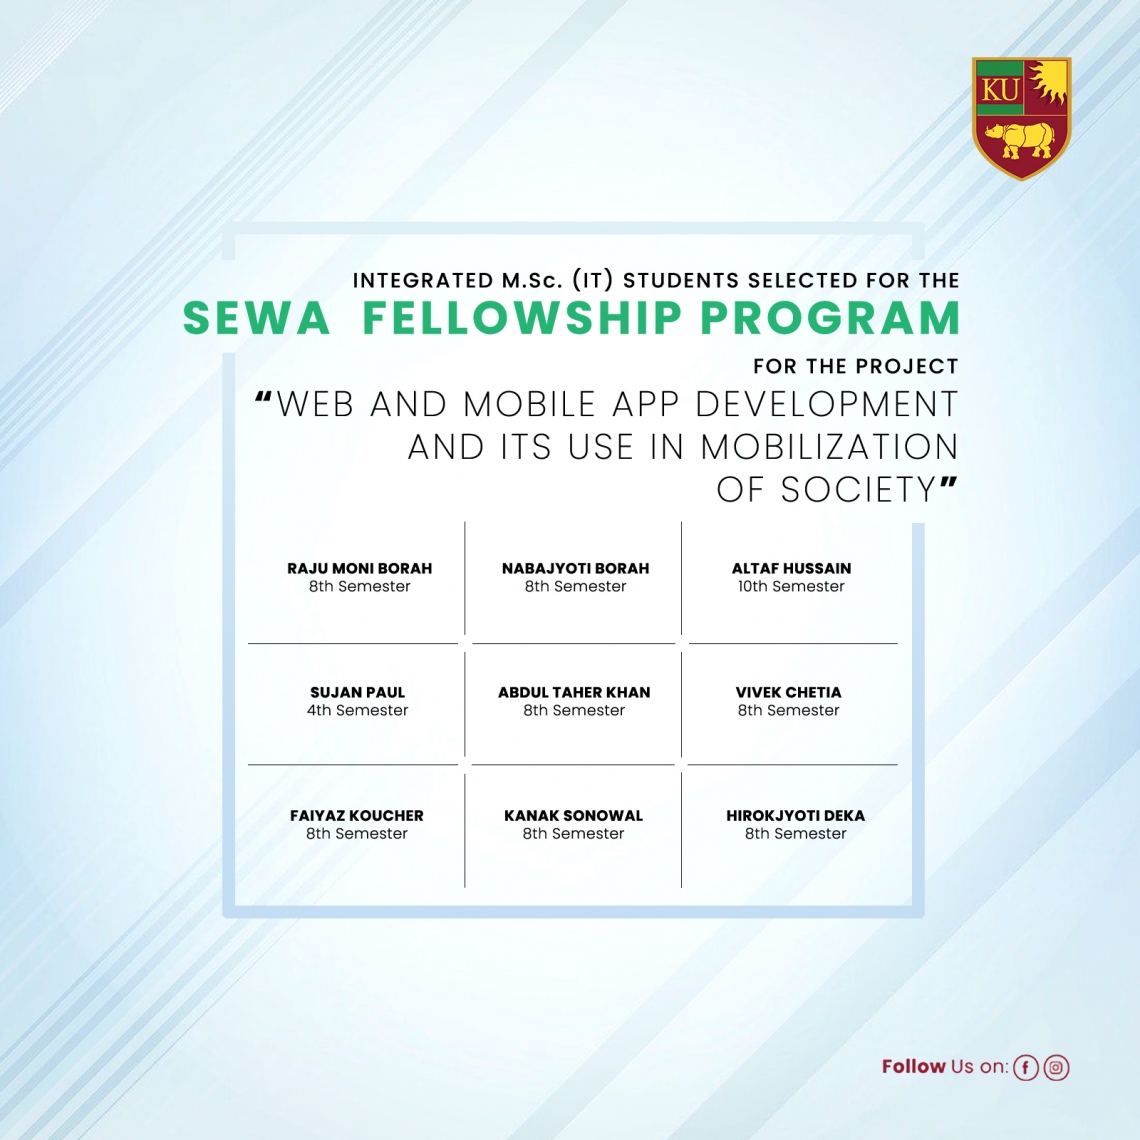 9 students from Integrated MSc IT have been bestowed with the SEWA Fellowship